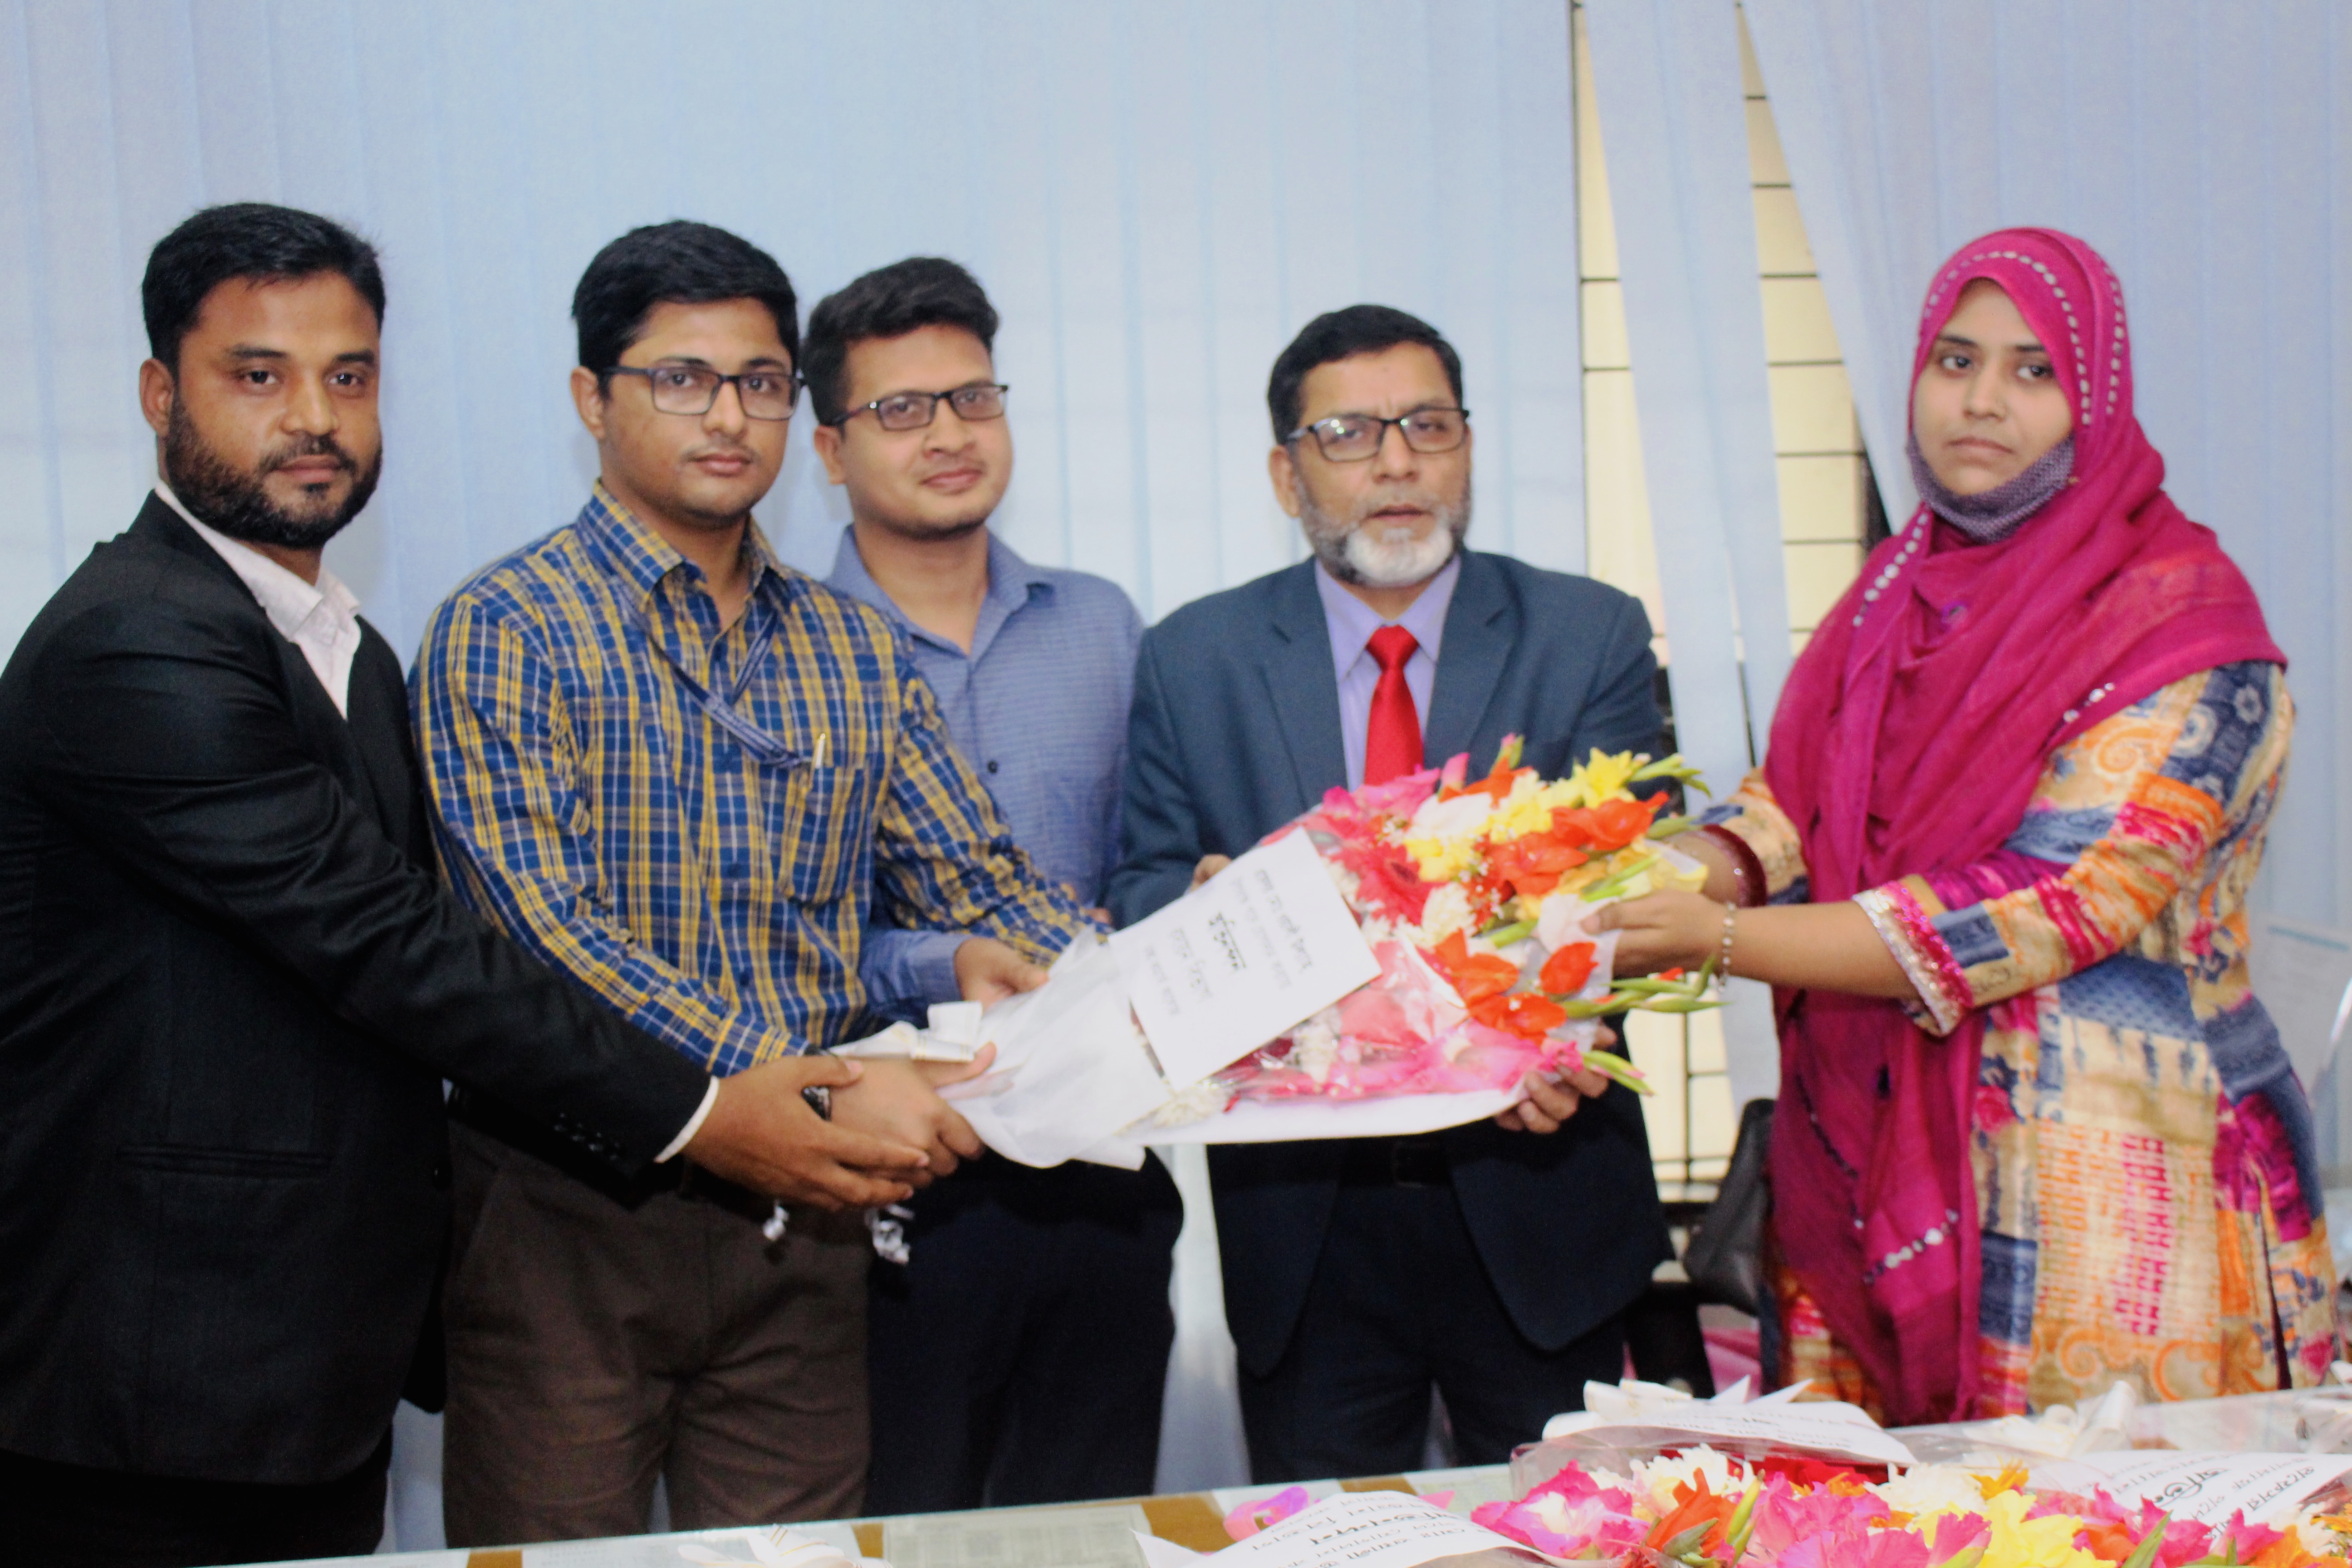 Reception to Vice Principal Prof. Md. Wali Ullah by Chemistry Department